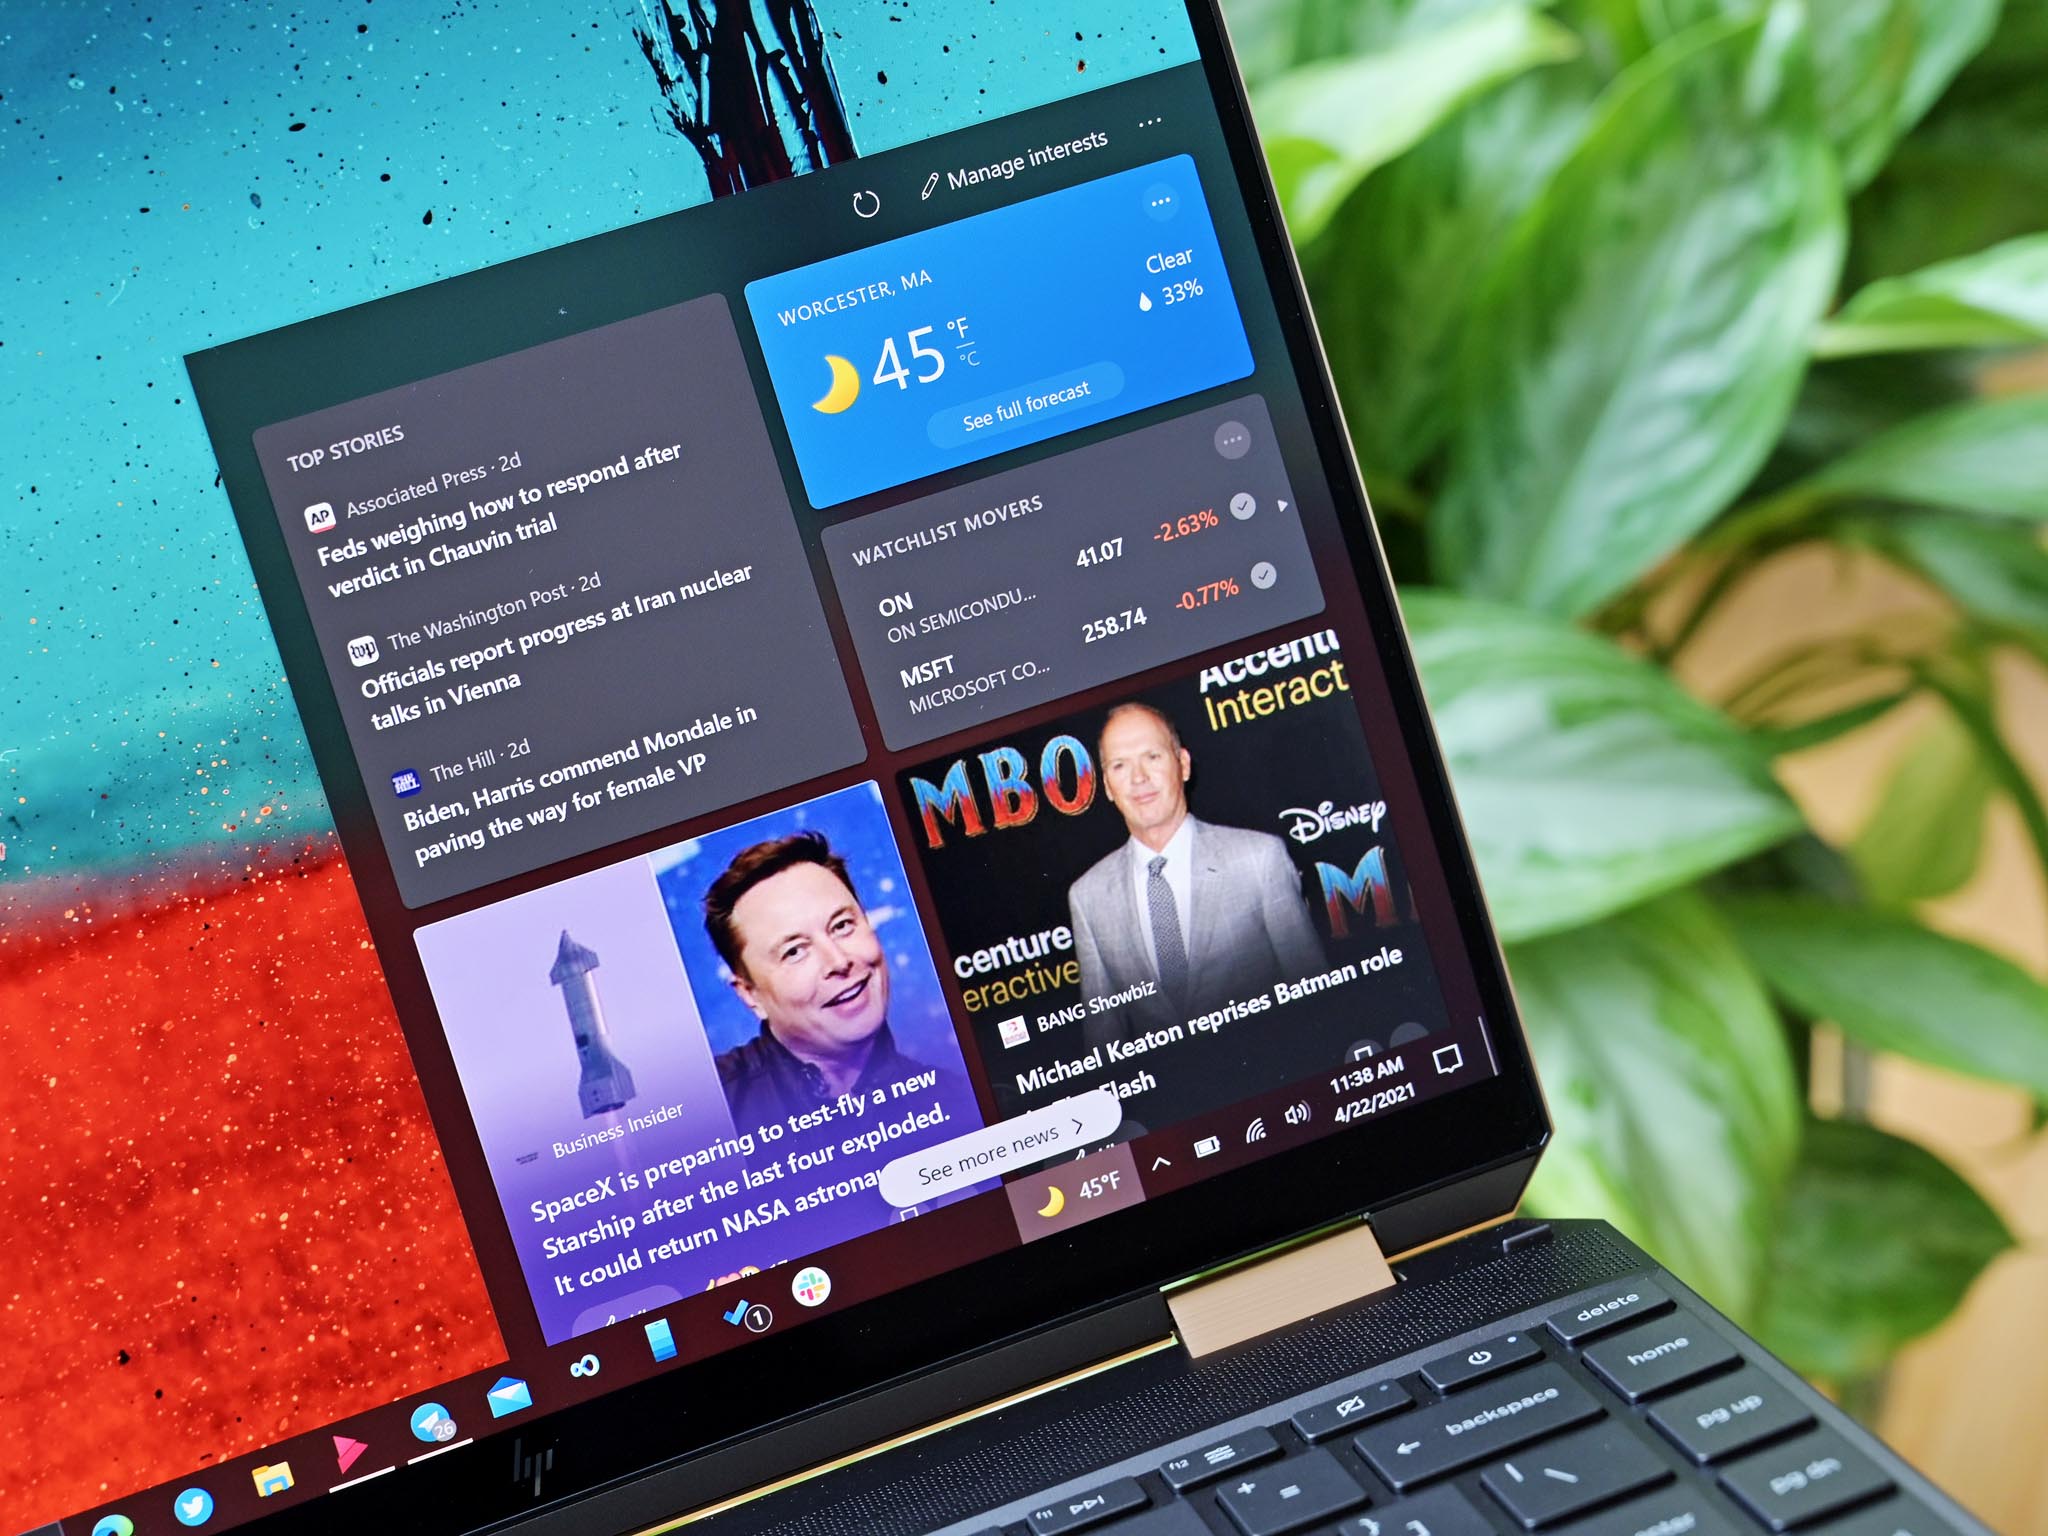 Windows 10's new Taskbar feature 'News and Interests' will roll out soon